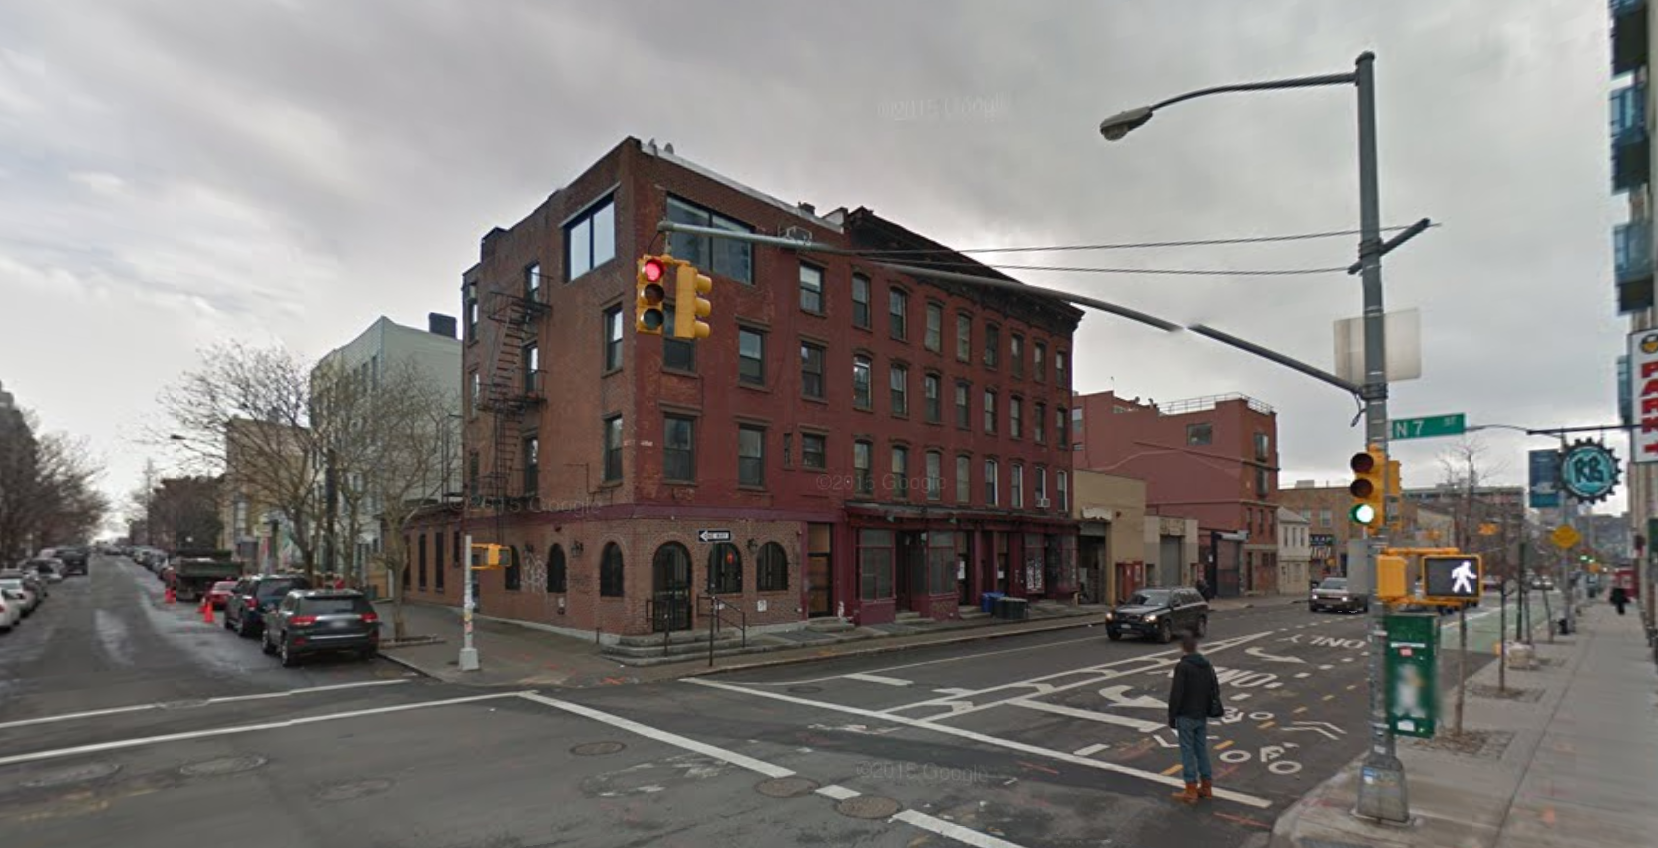 119-123 Kent Avenue before the scaffolding went up in January 2013. image via Google Maps